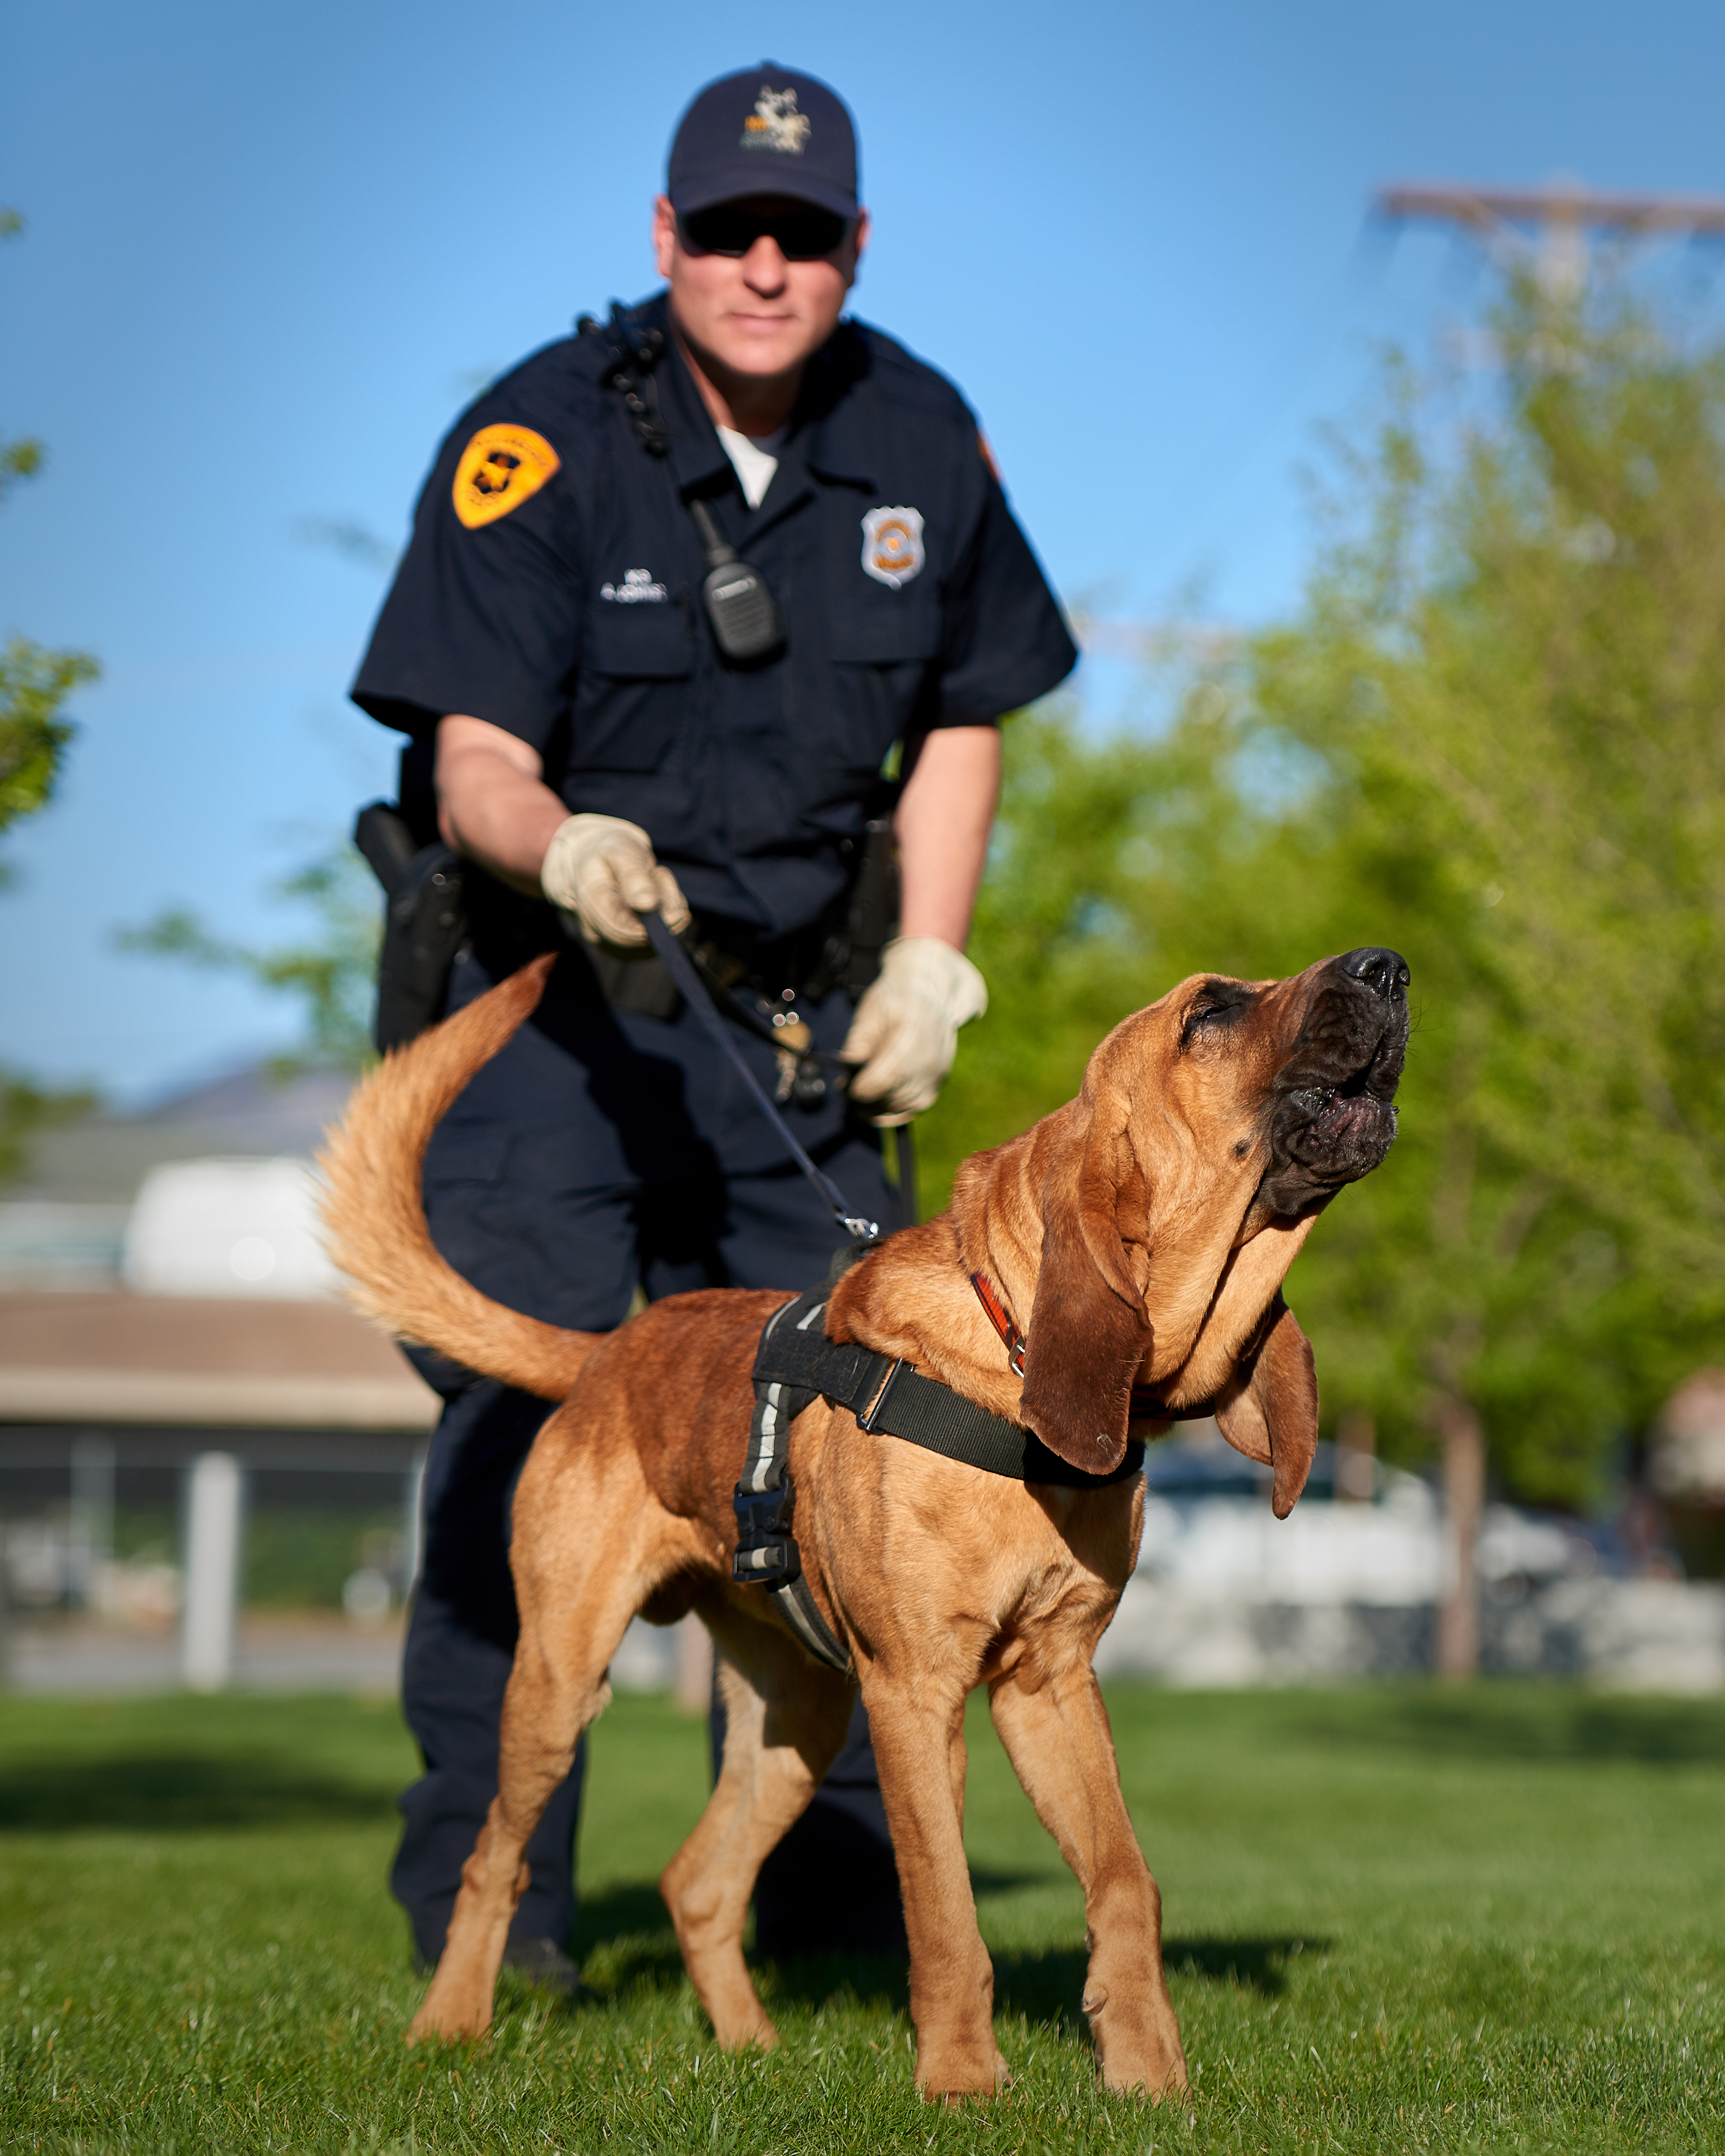 are k9 dogs considered police officers